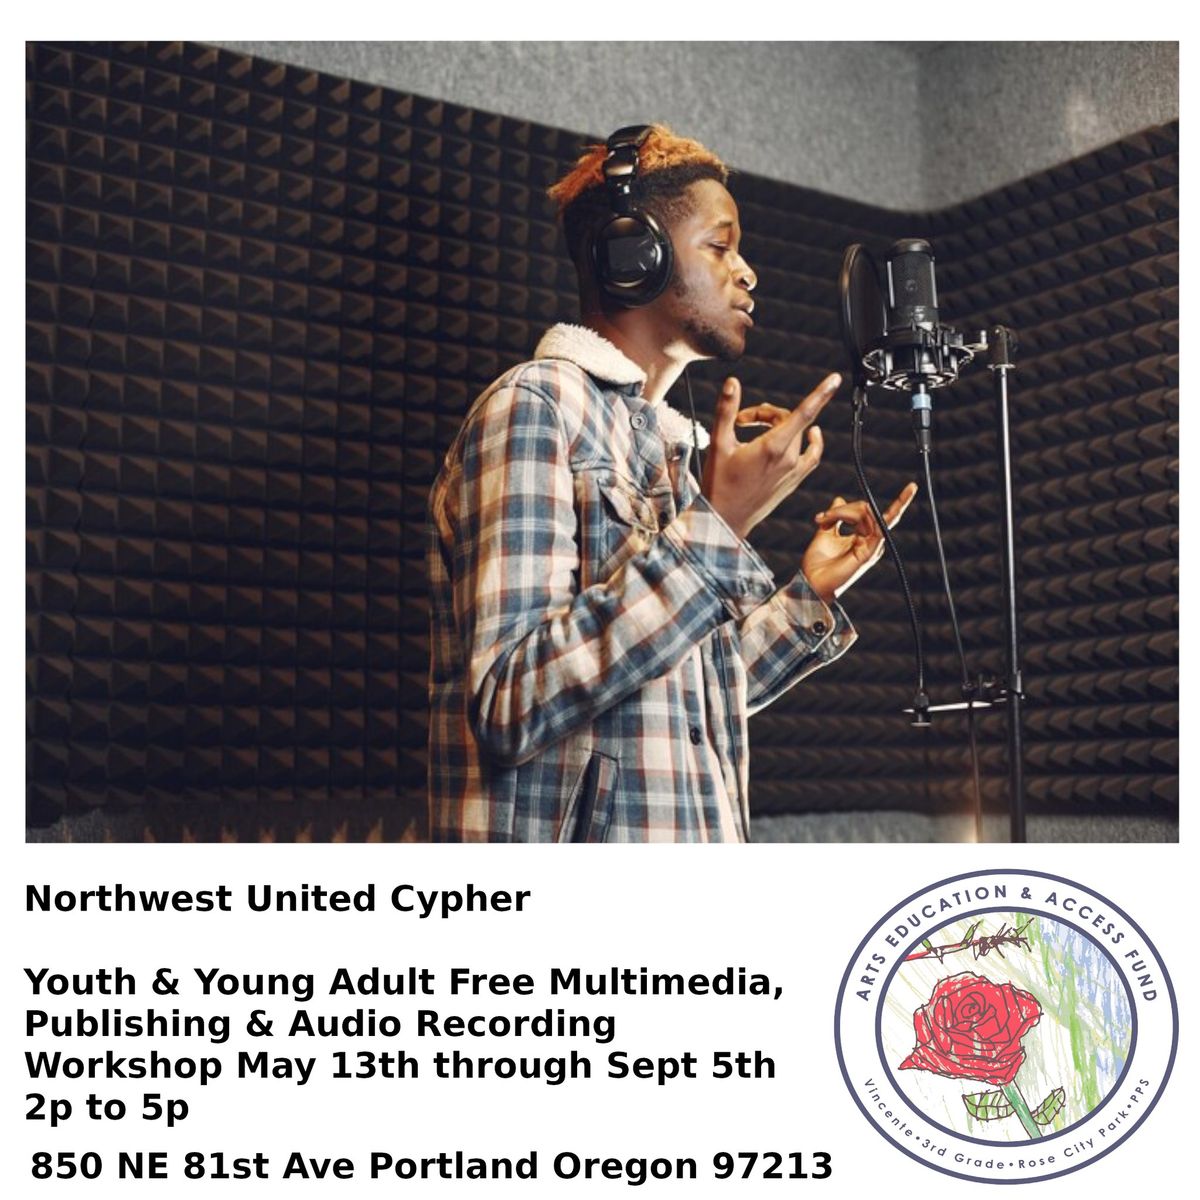 Youth & Young Adult Free Multimedia, Publishing & Audio Recording Workshop